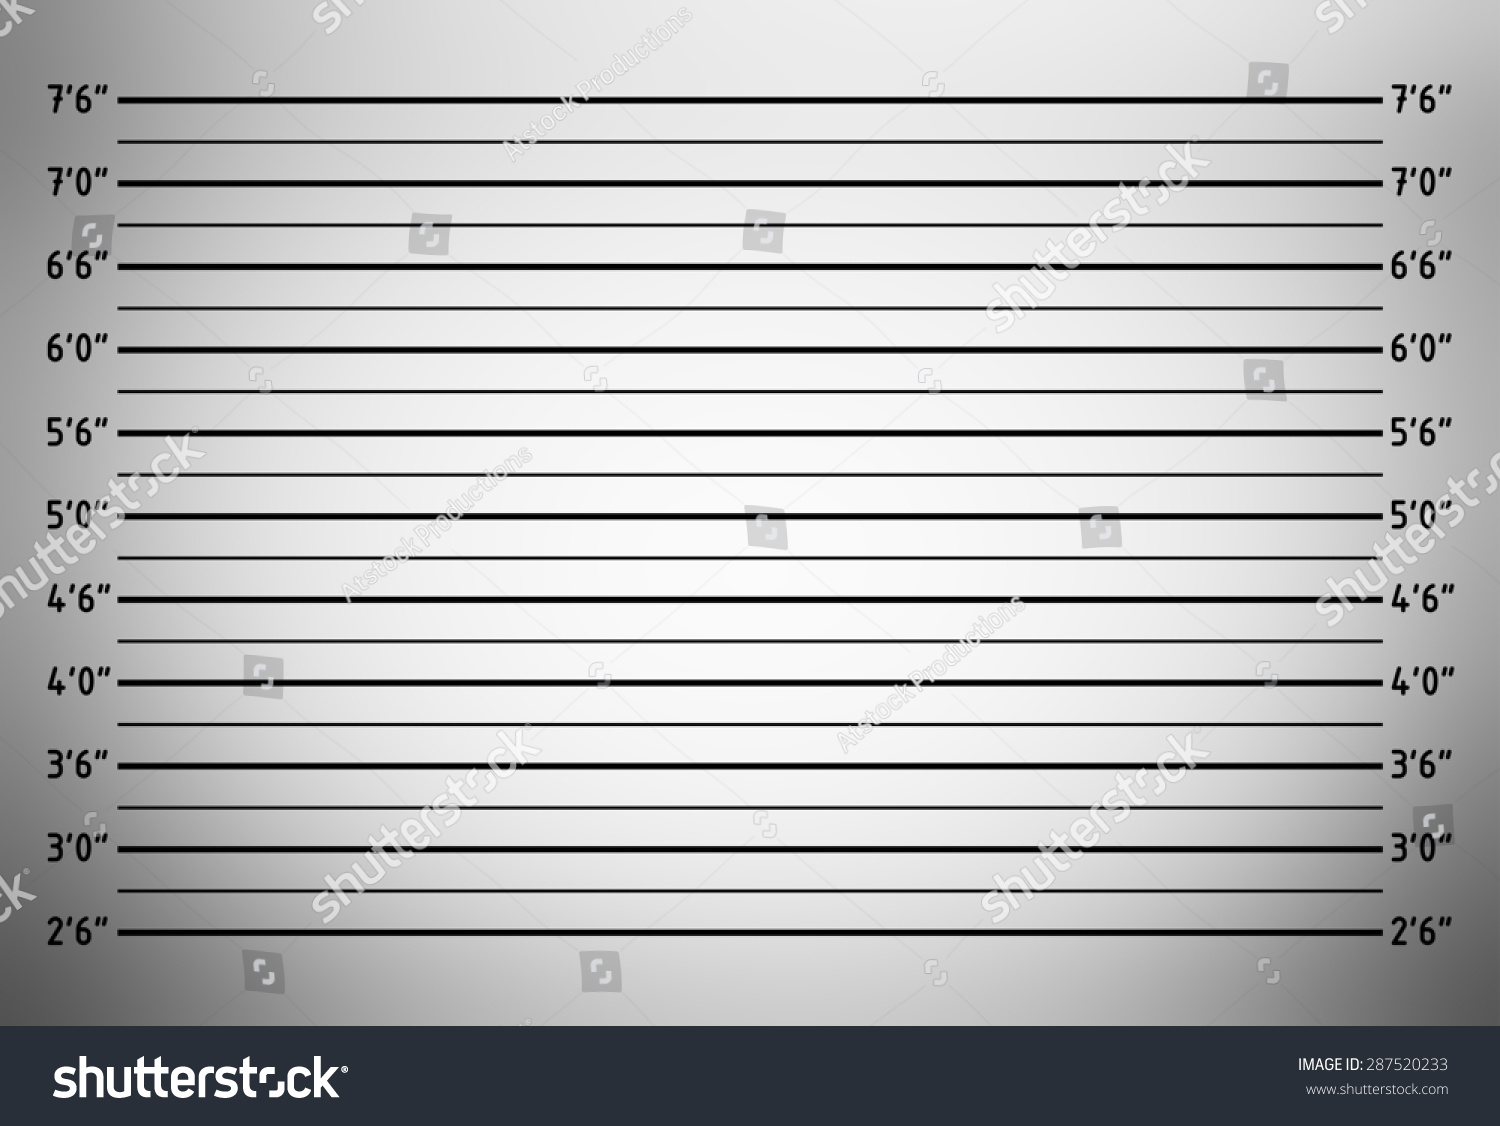 803 Police wall lineup Images, Stock Photos & Vectors | Shutterstock